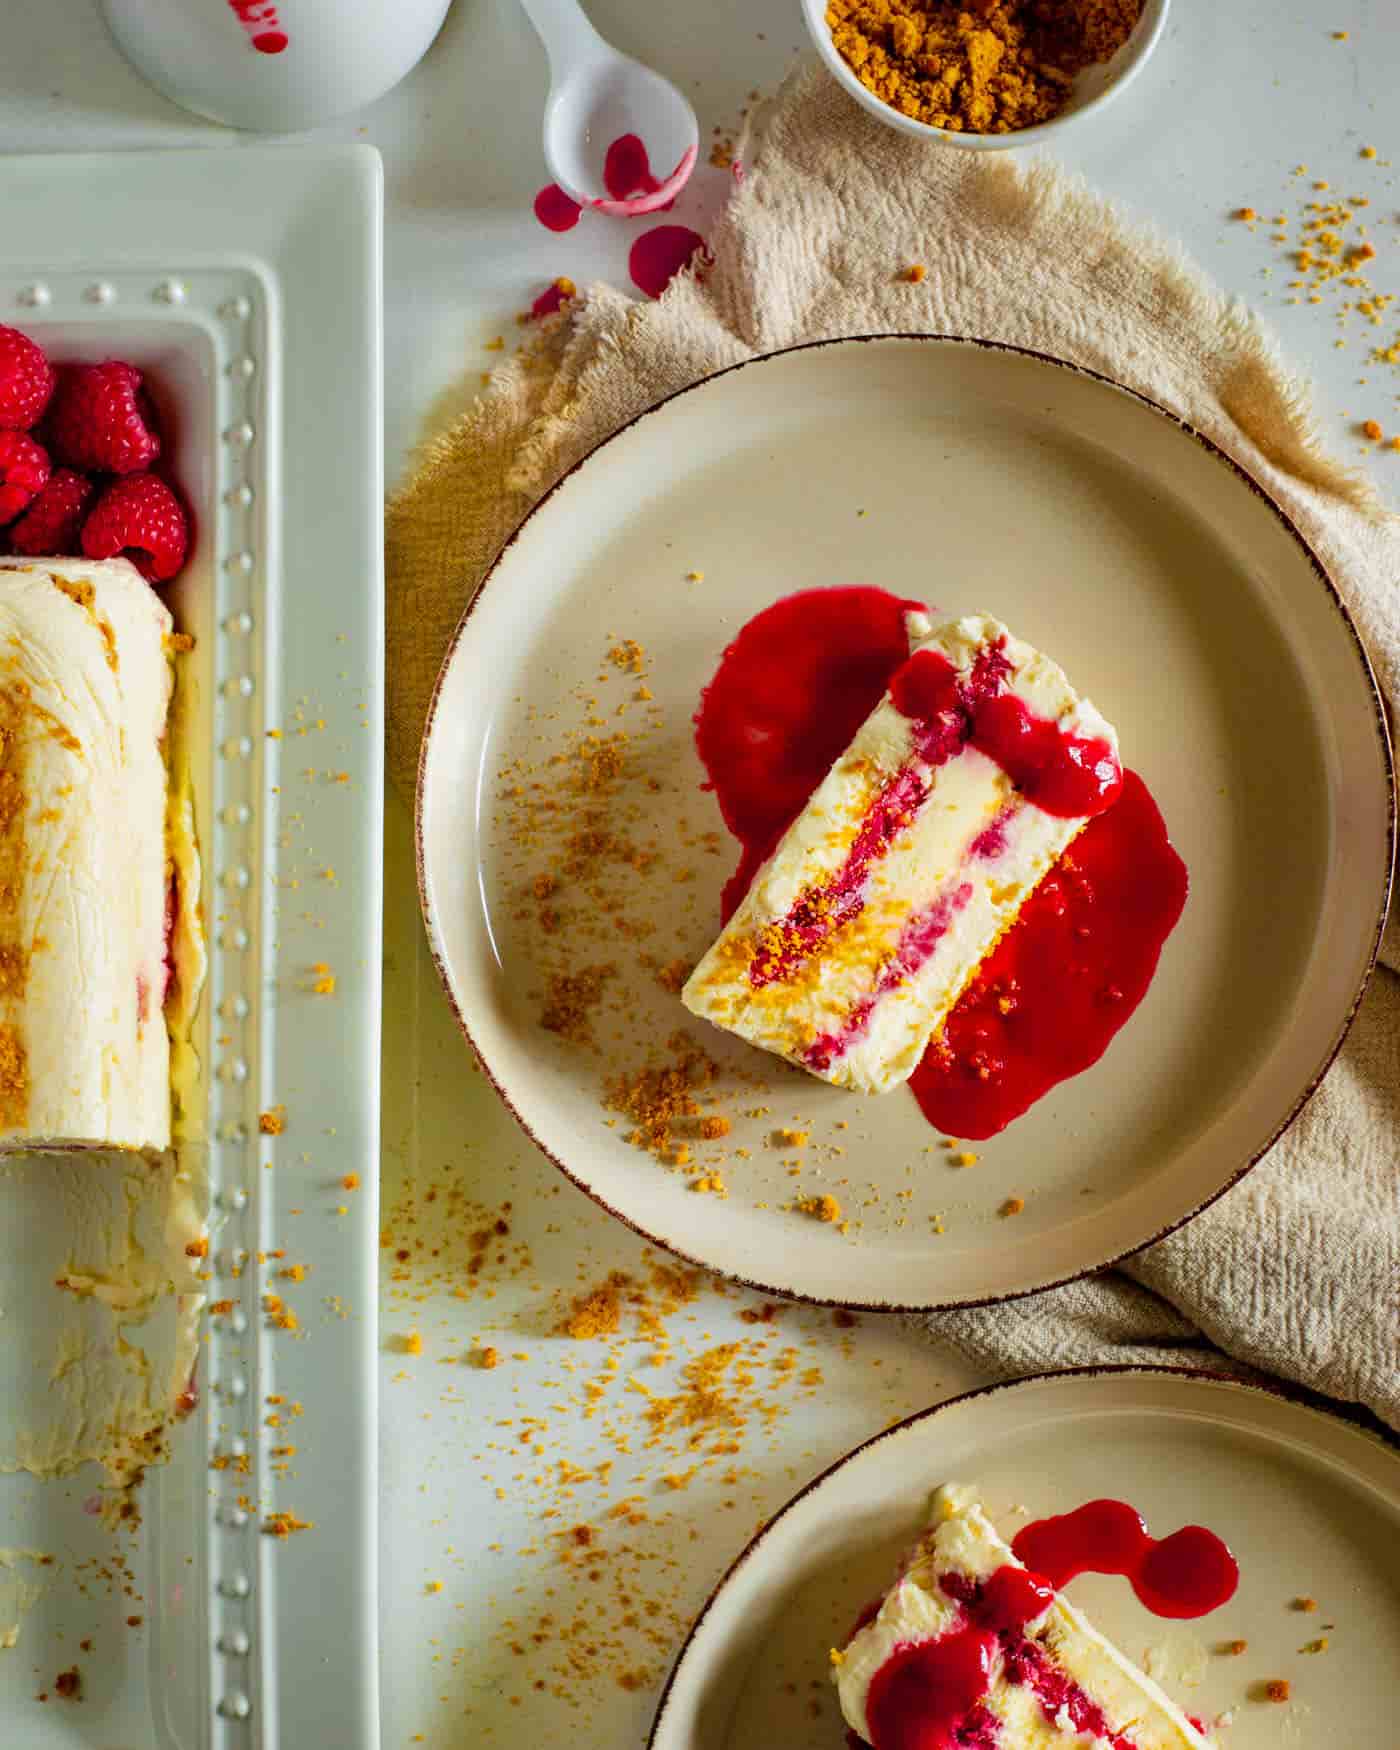 slices of cheesecake semifreddo on beige small lipped plates surrounded by ginger biscuit crumbs on a white surface . A long rectangular white plate with the rest of the semi freddo and some raspberries is to the side. A small white bowl is at the top half in sight